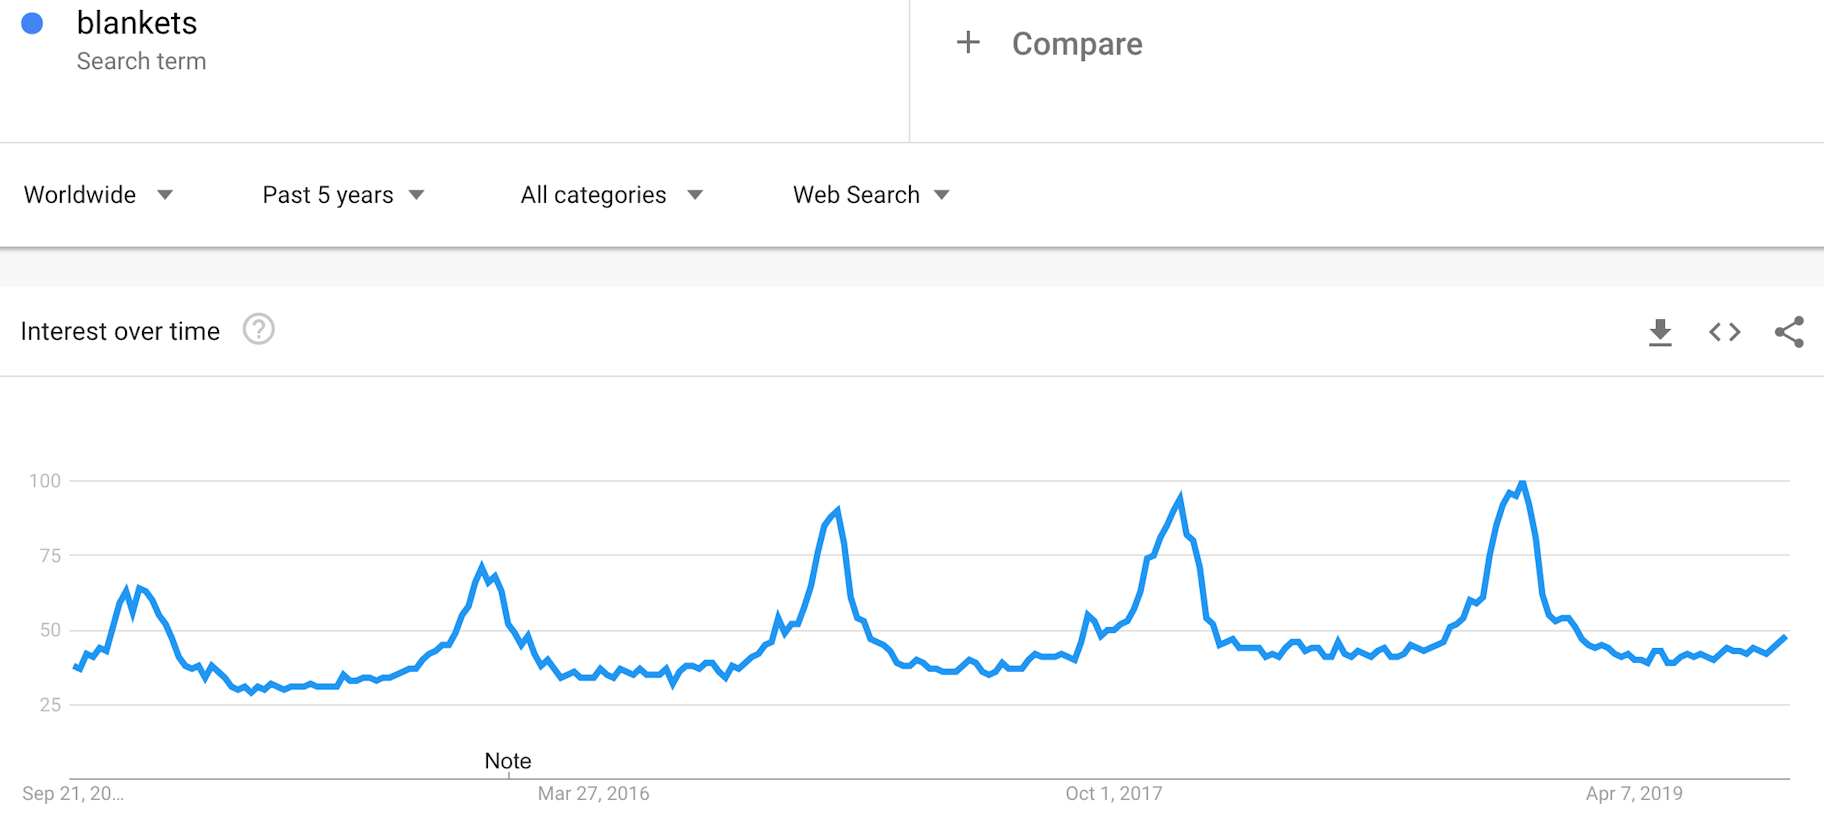 google trends data showing popularity of 'blankets' over 5 years, peaking in winter